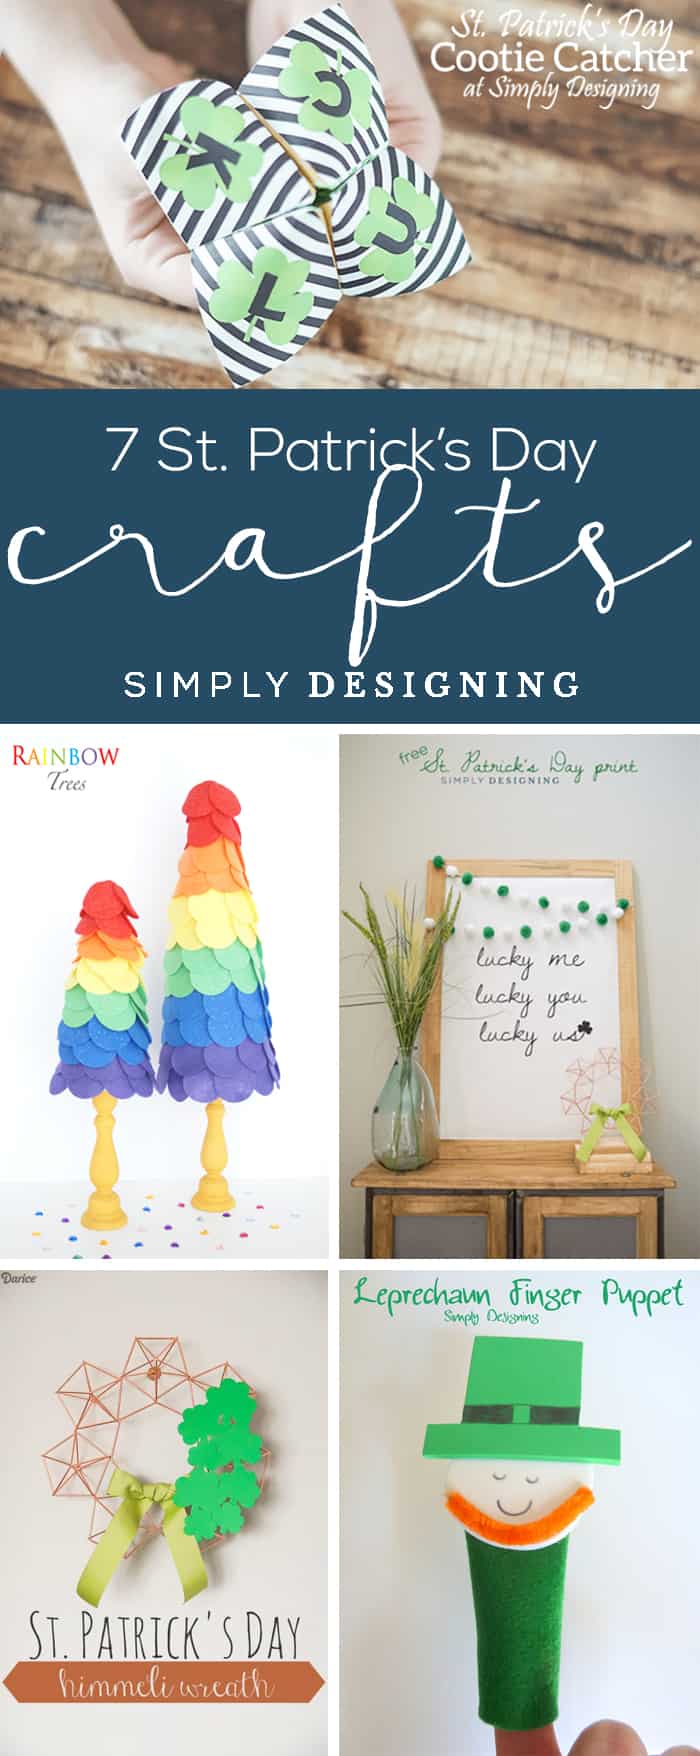 7 Easy St. Patrick's Day Crafts